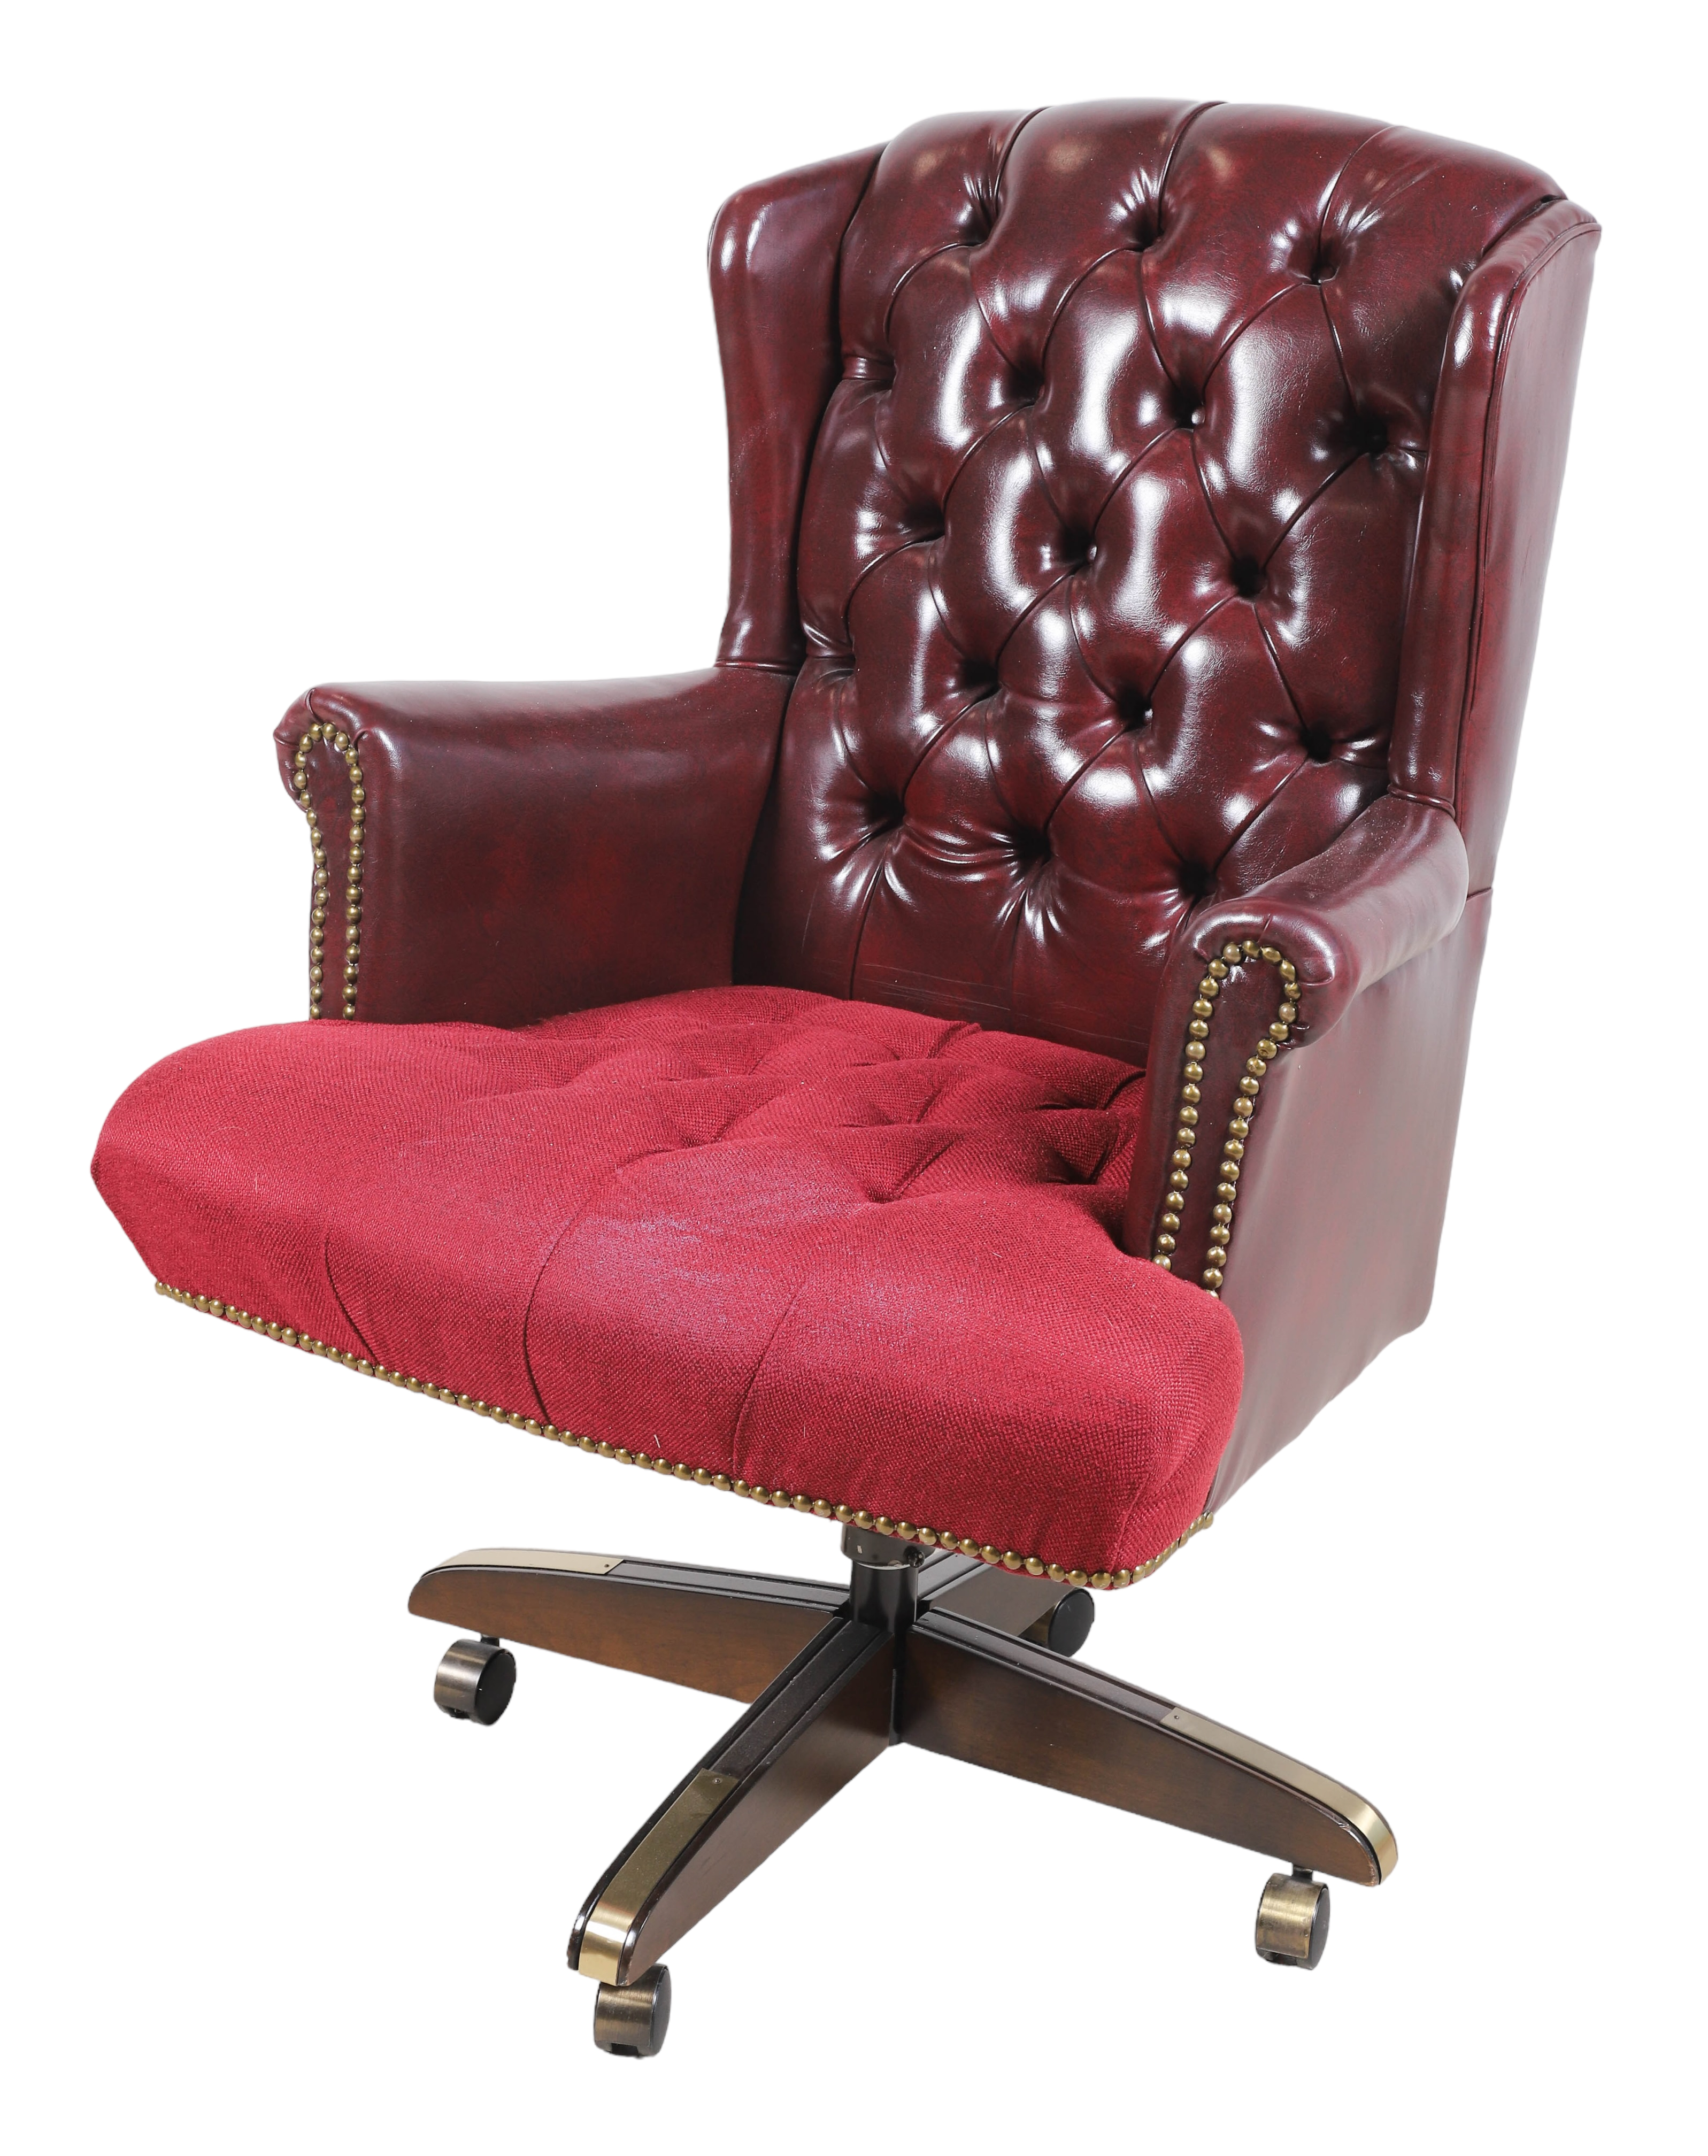 Contemporary leather office chair,